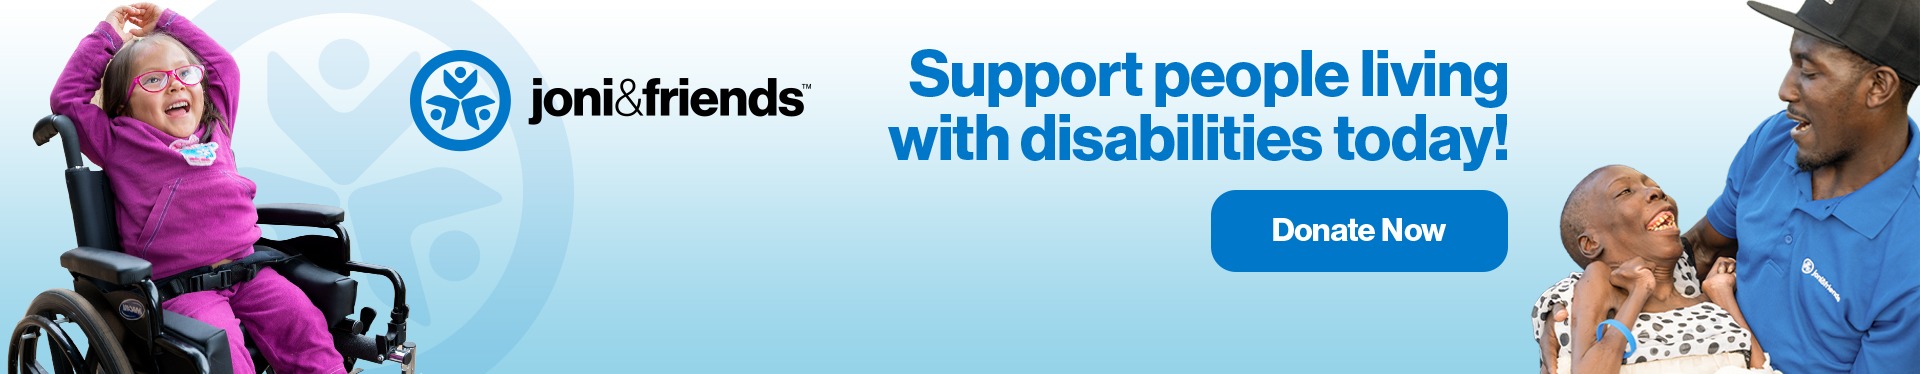 Support people living with disabilities today! Donate Now